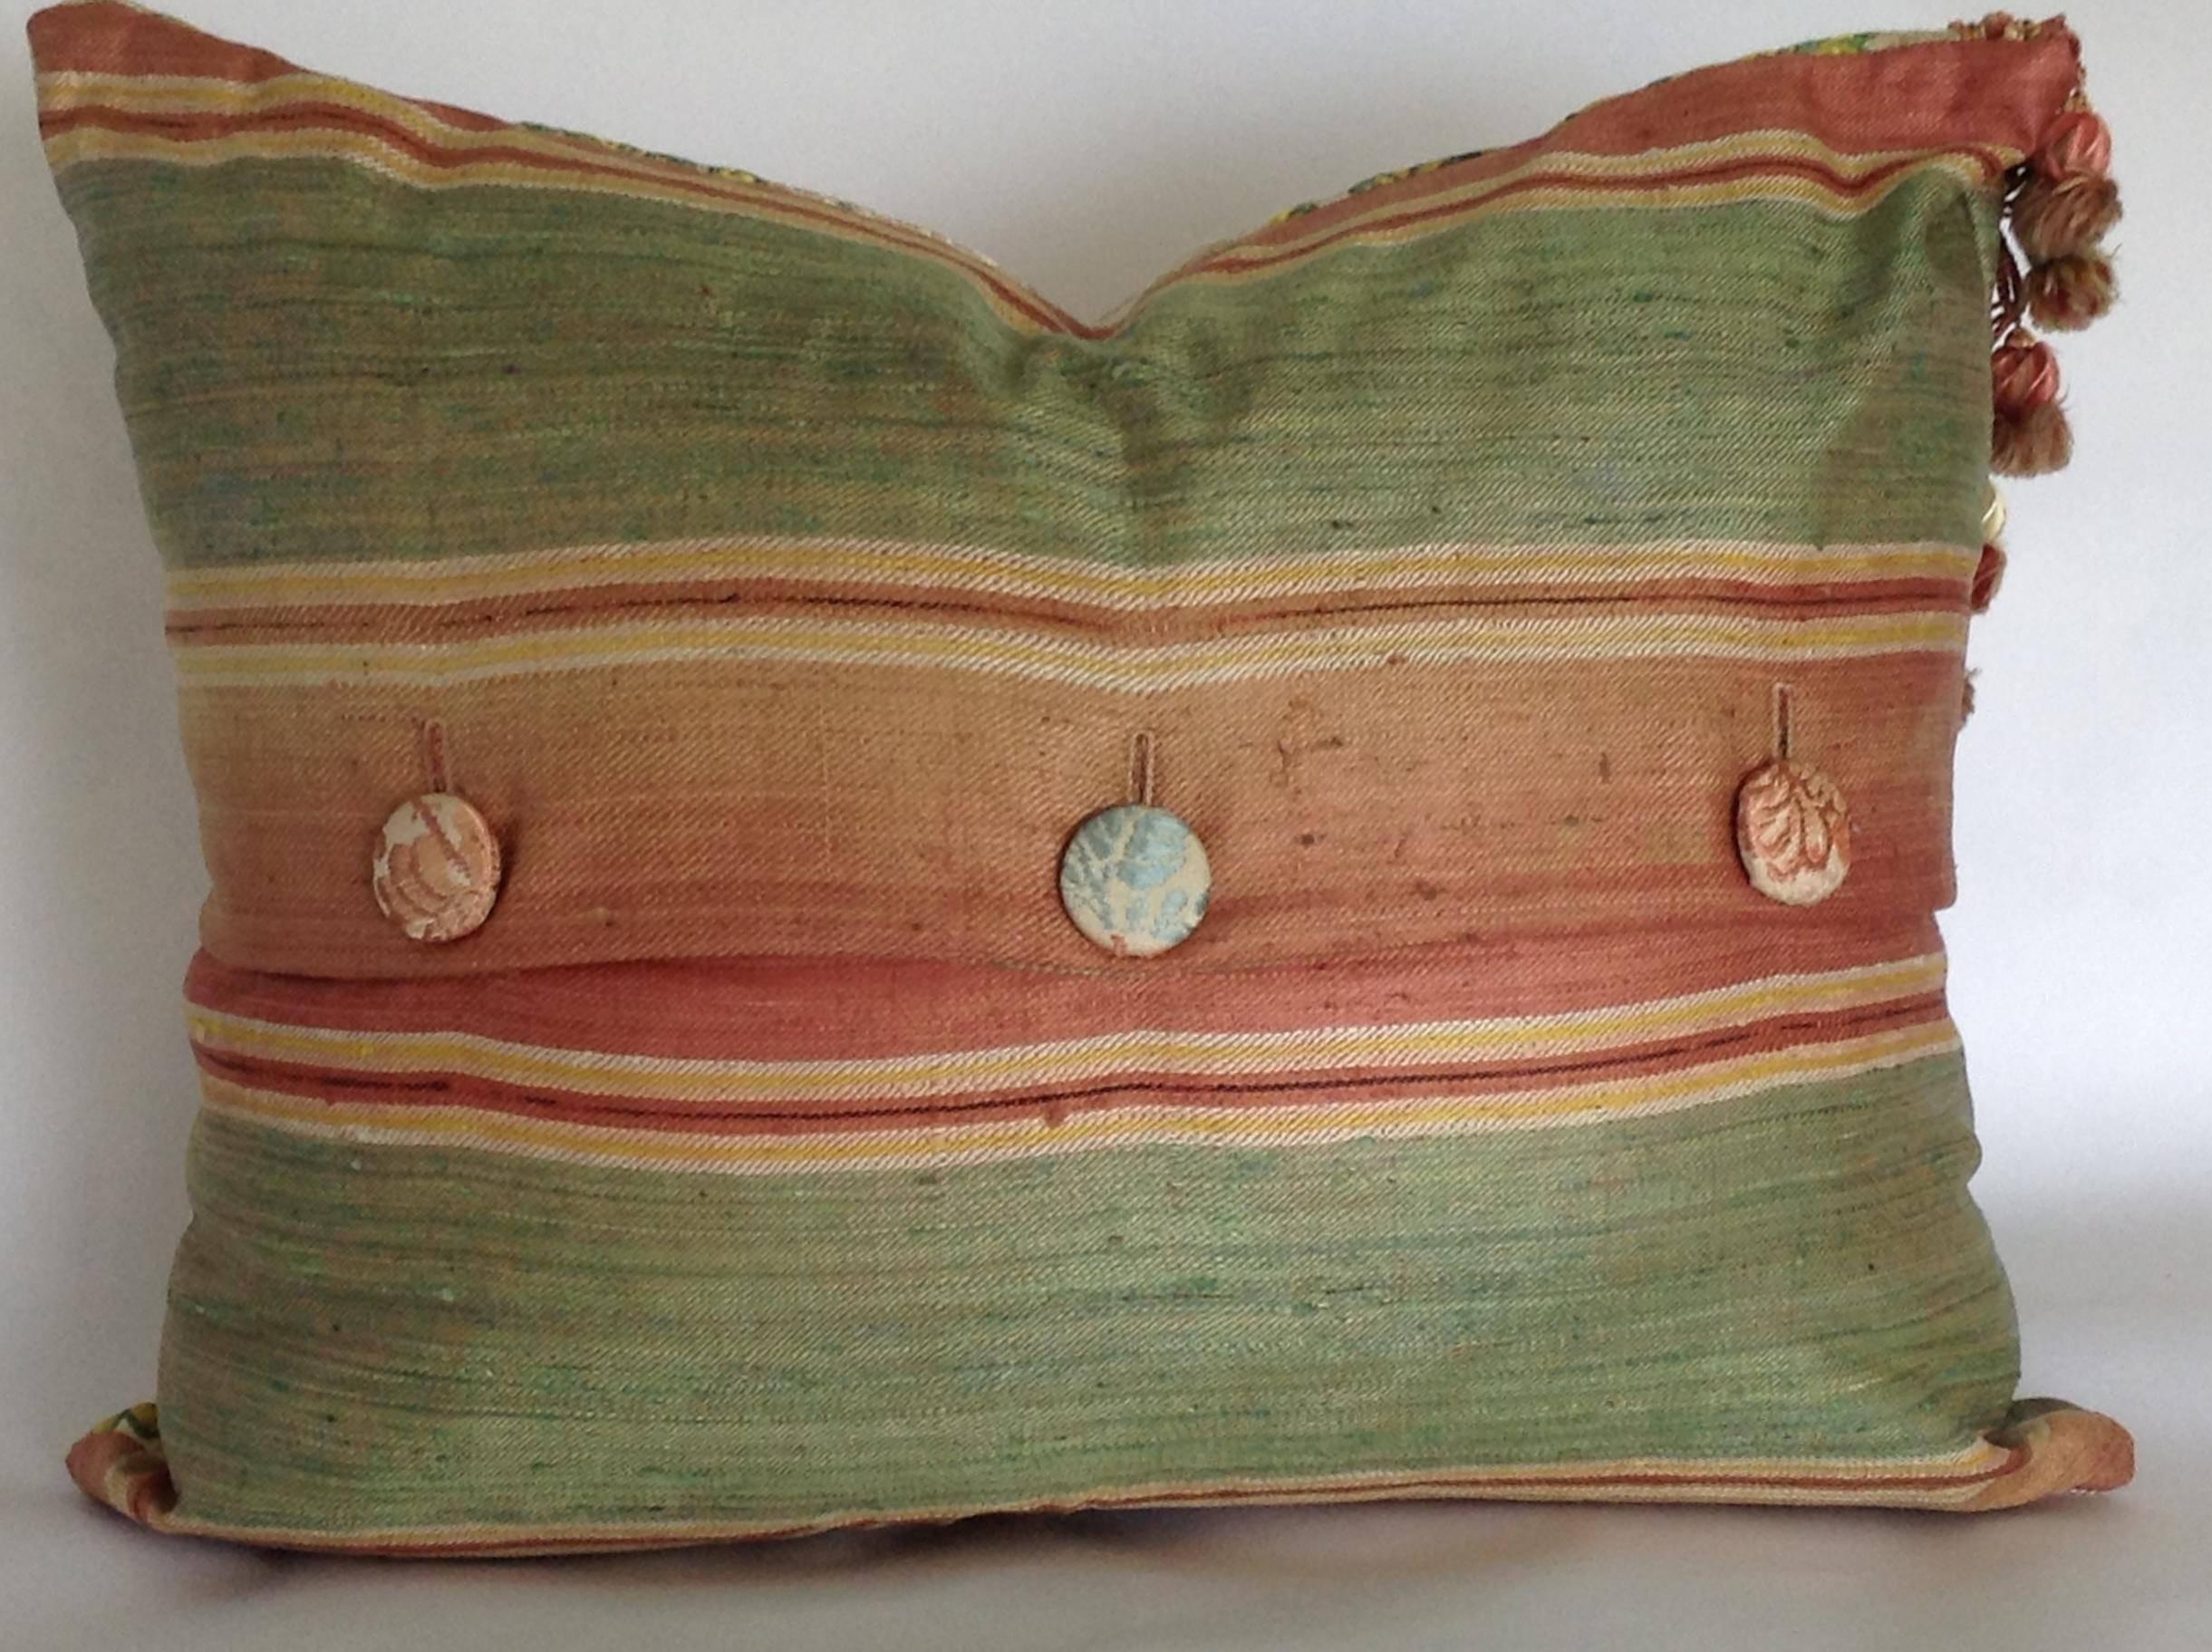 This magnificent pillow features:
An exquisite antique 18th century floral silk brocade textile from Lyon, France, famous for its silk production. The brocade shows some wear and small marks but is in outstanding condition given it’s is age! The